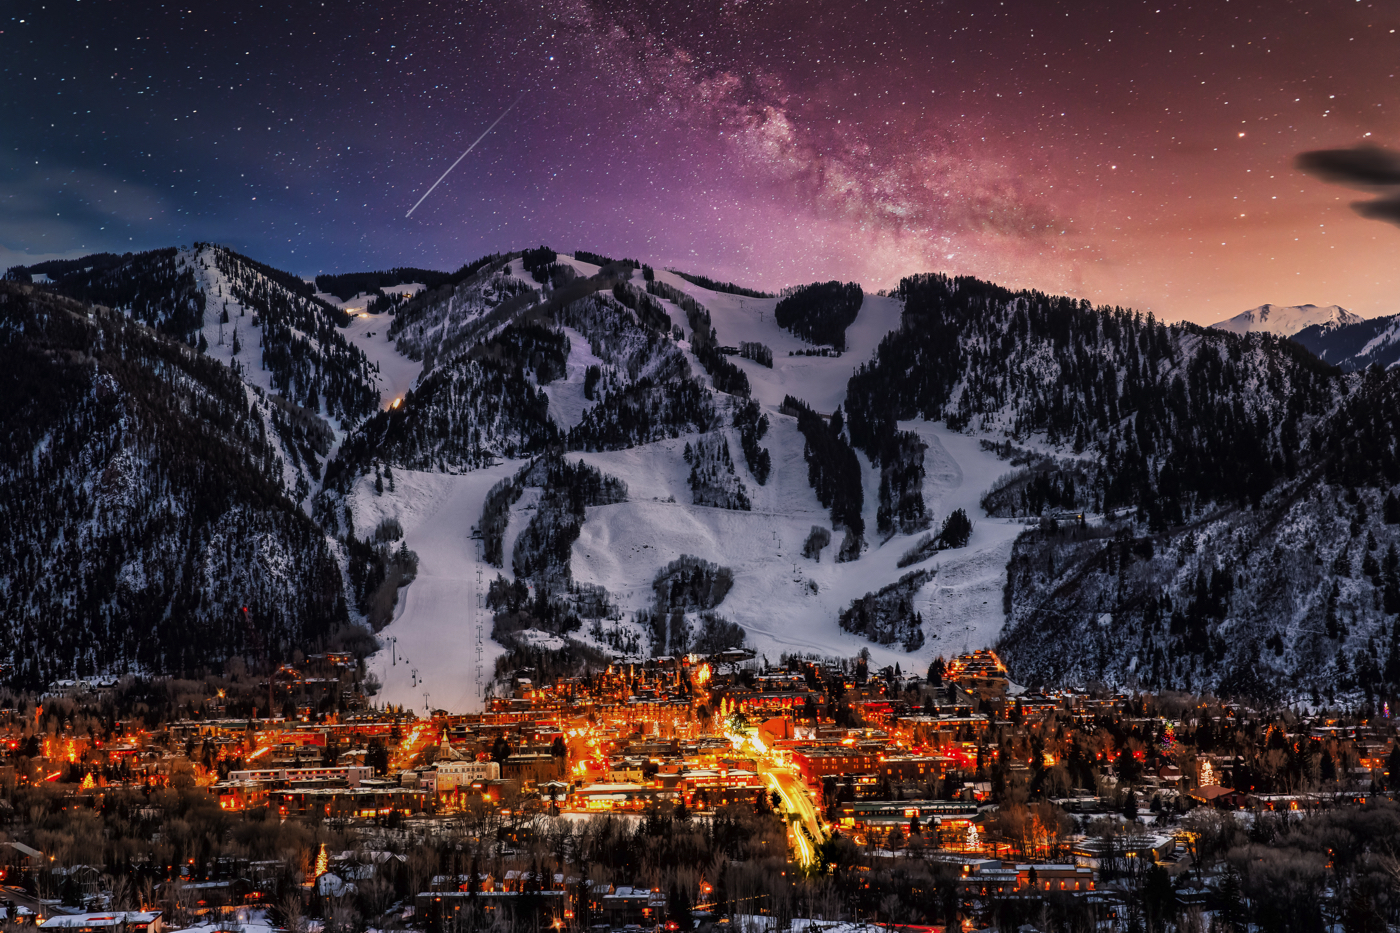 18 BEST THINGS TO DO IN ASPEN FOR YEAR-ROUND FUN